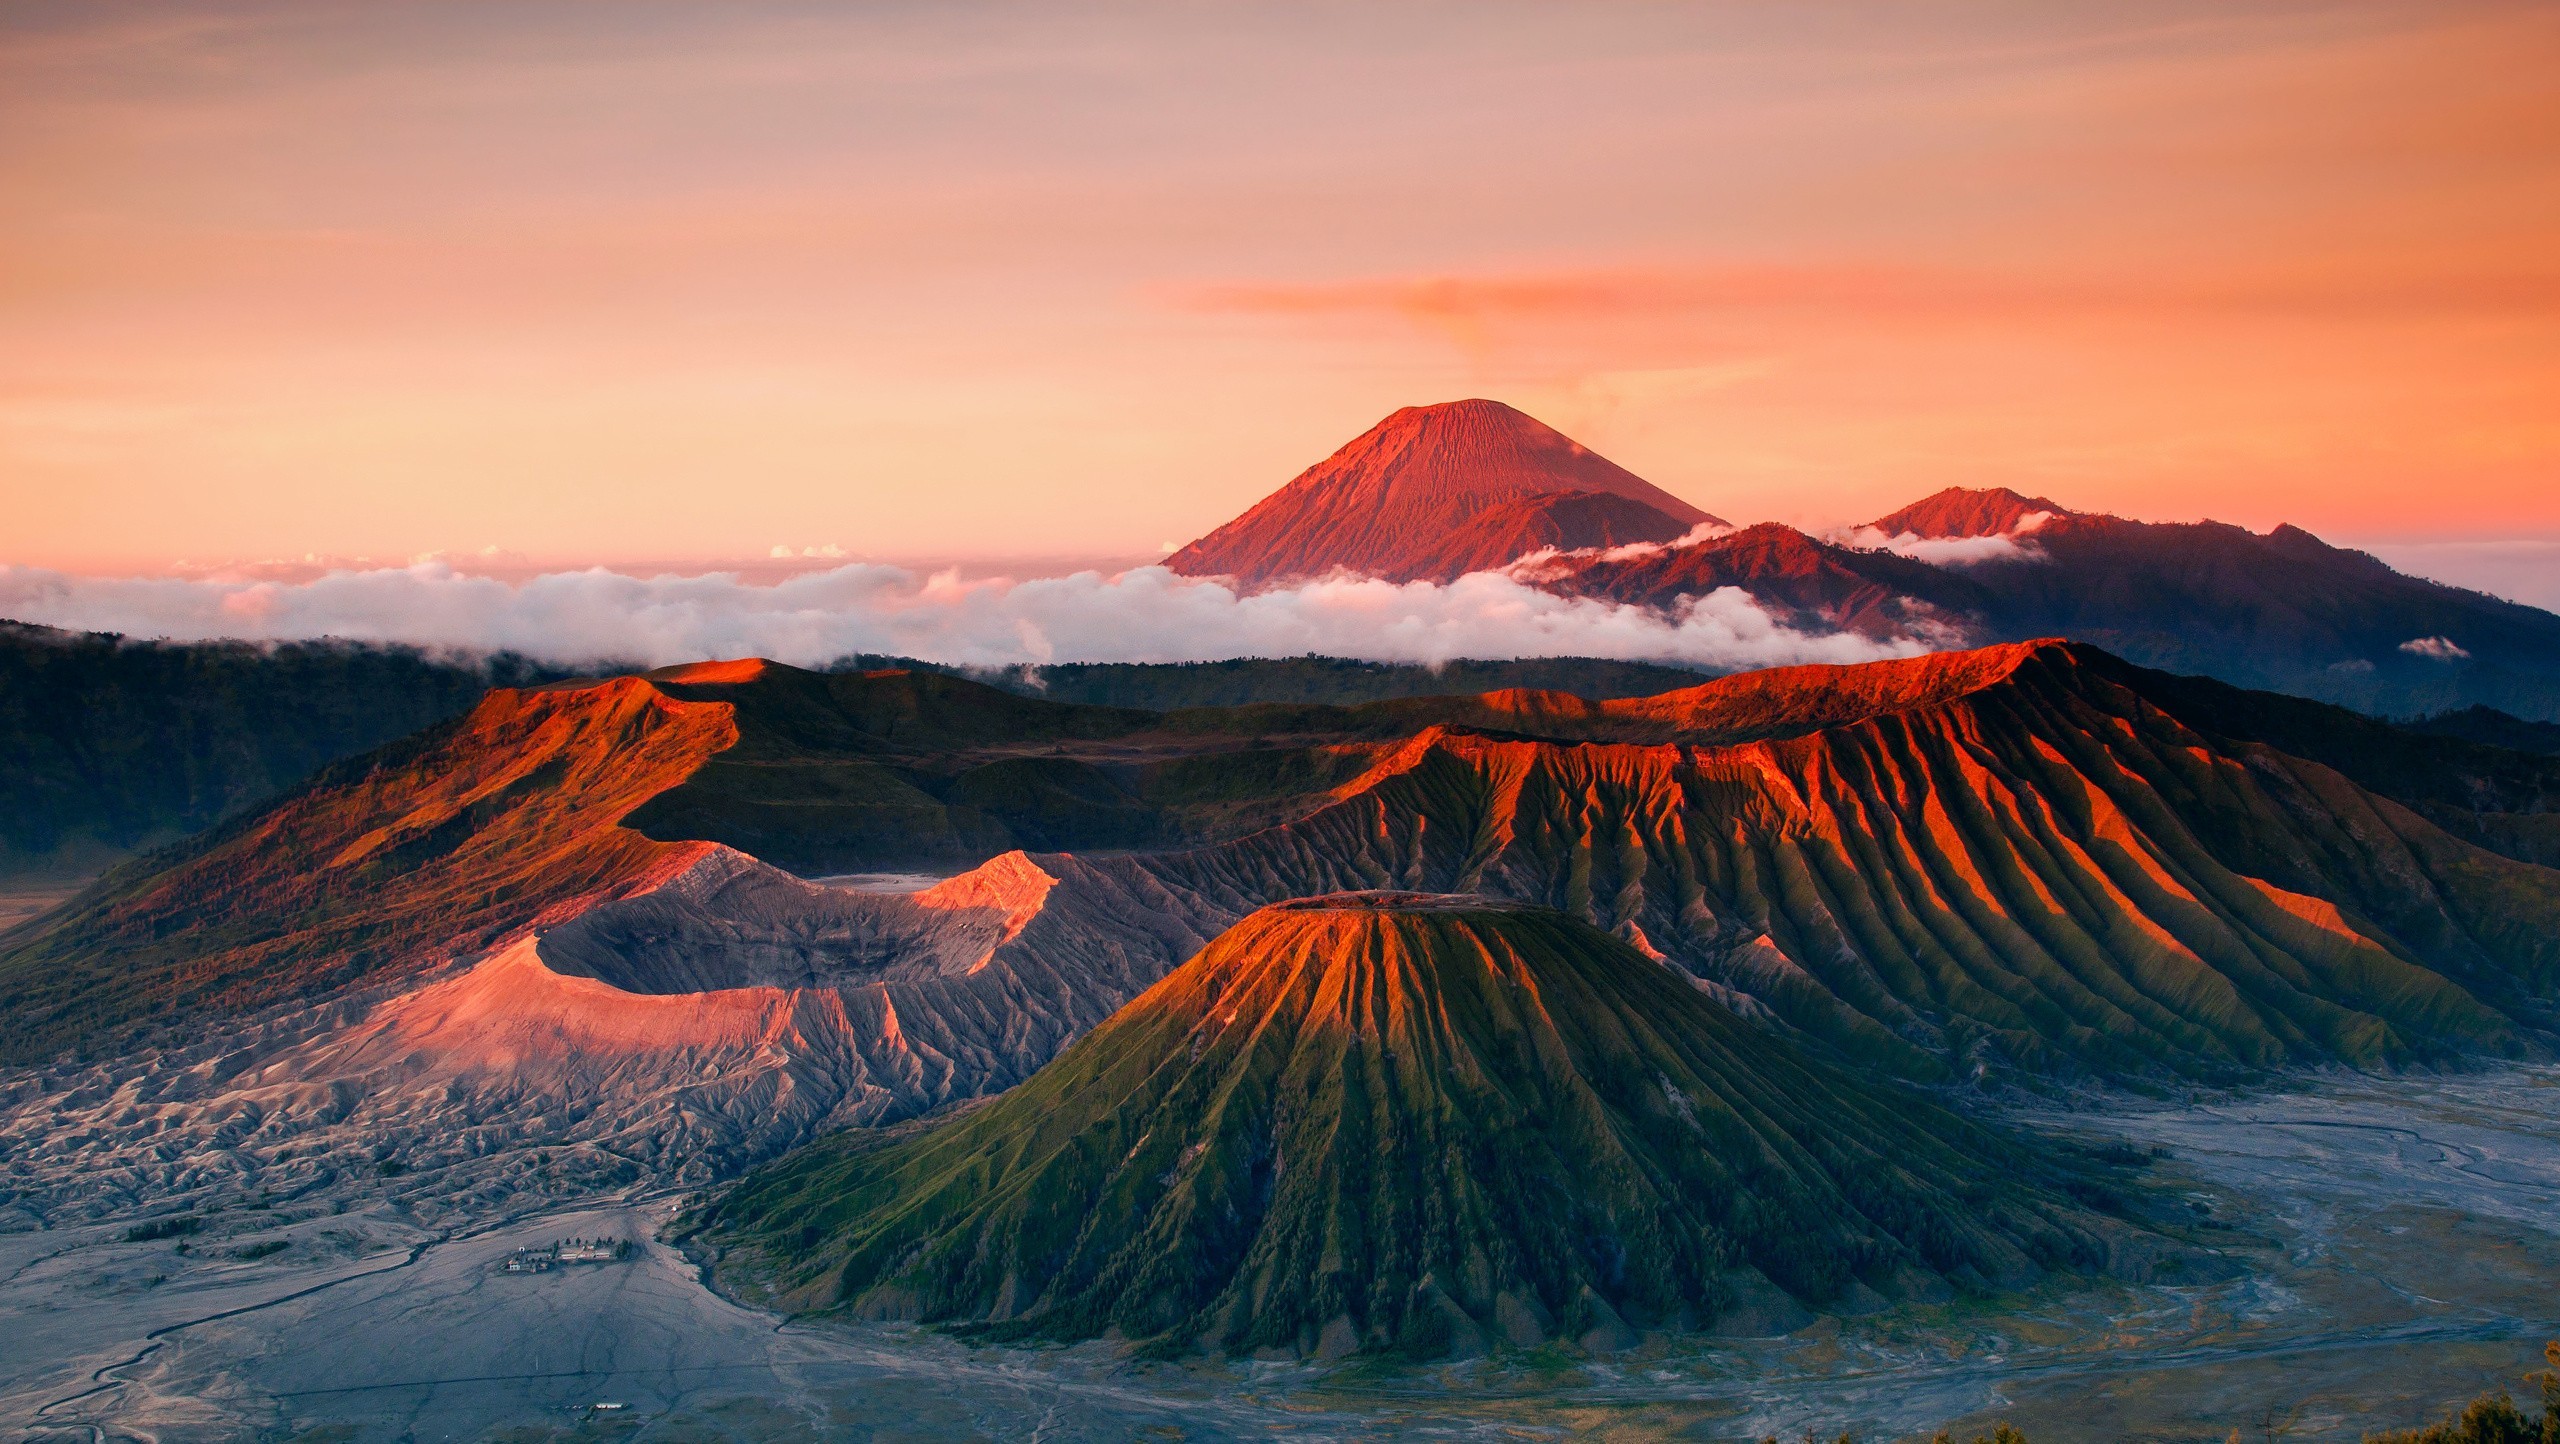 General 2560x1444 nature mountains landscape volcano Mount Bromo dusk clouds crater Indonesia Java (island) urban Bali